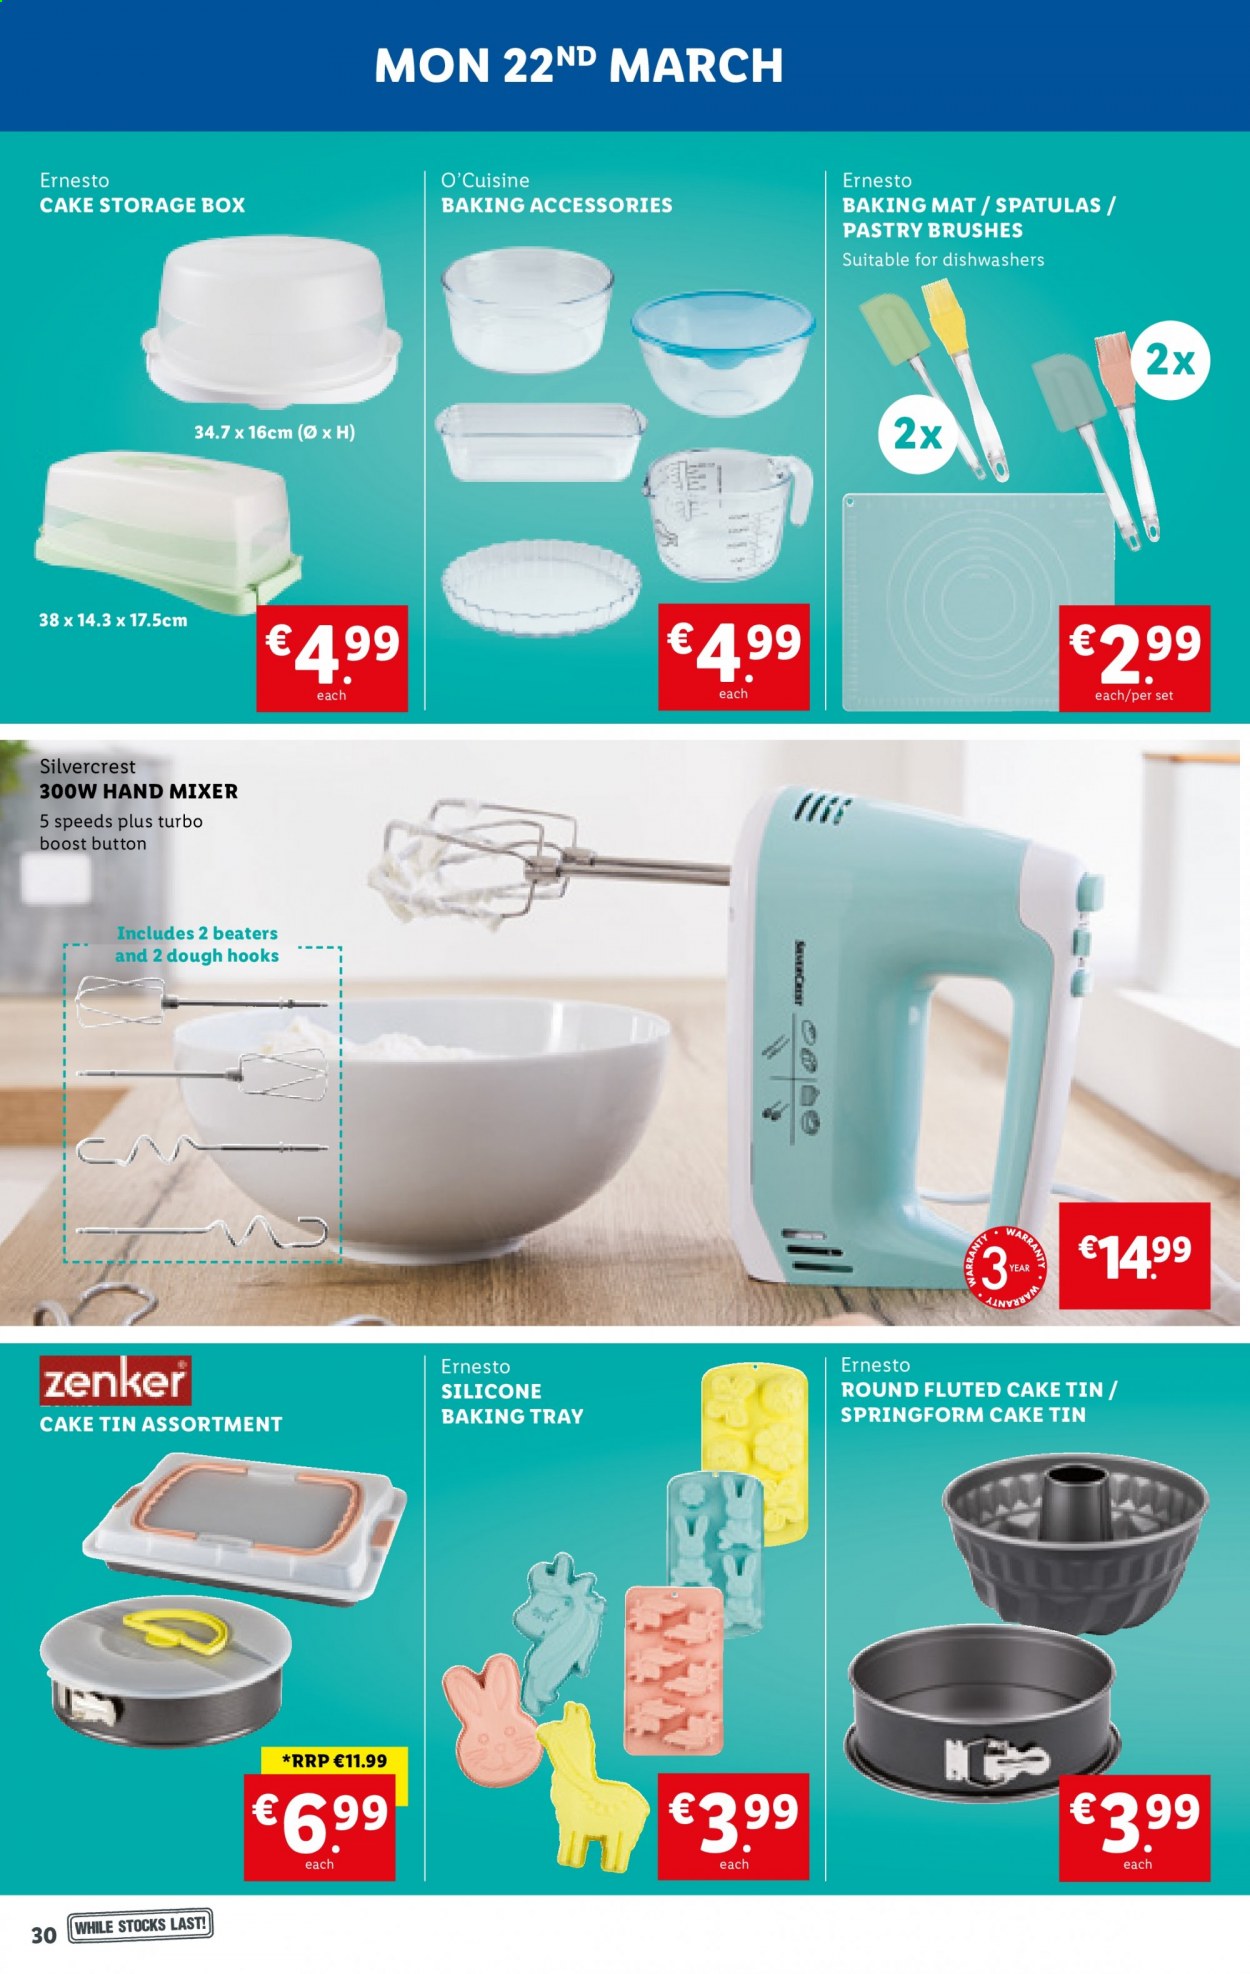 thumbnail - Lidl offer  - 18.03.2021 - 24.03.2021 - Sales products - SilverCrest, cake, Boost, hook, Ernesto, spatula, baking accessories, baking tray, storage box, mixer, hand mixer. Page 30.